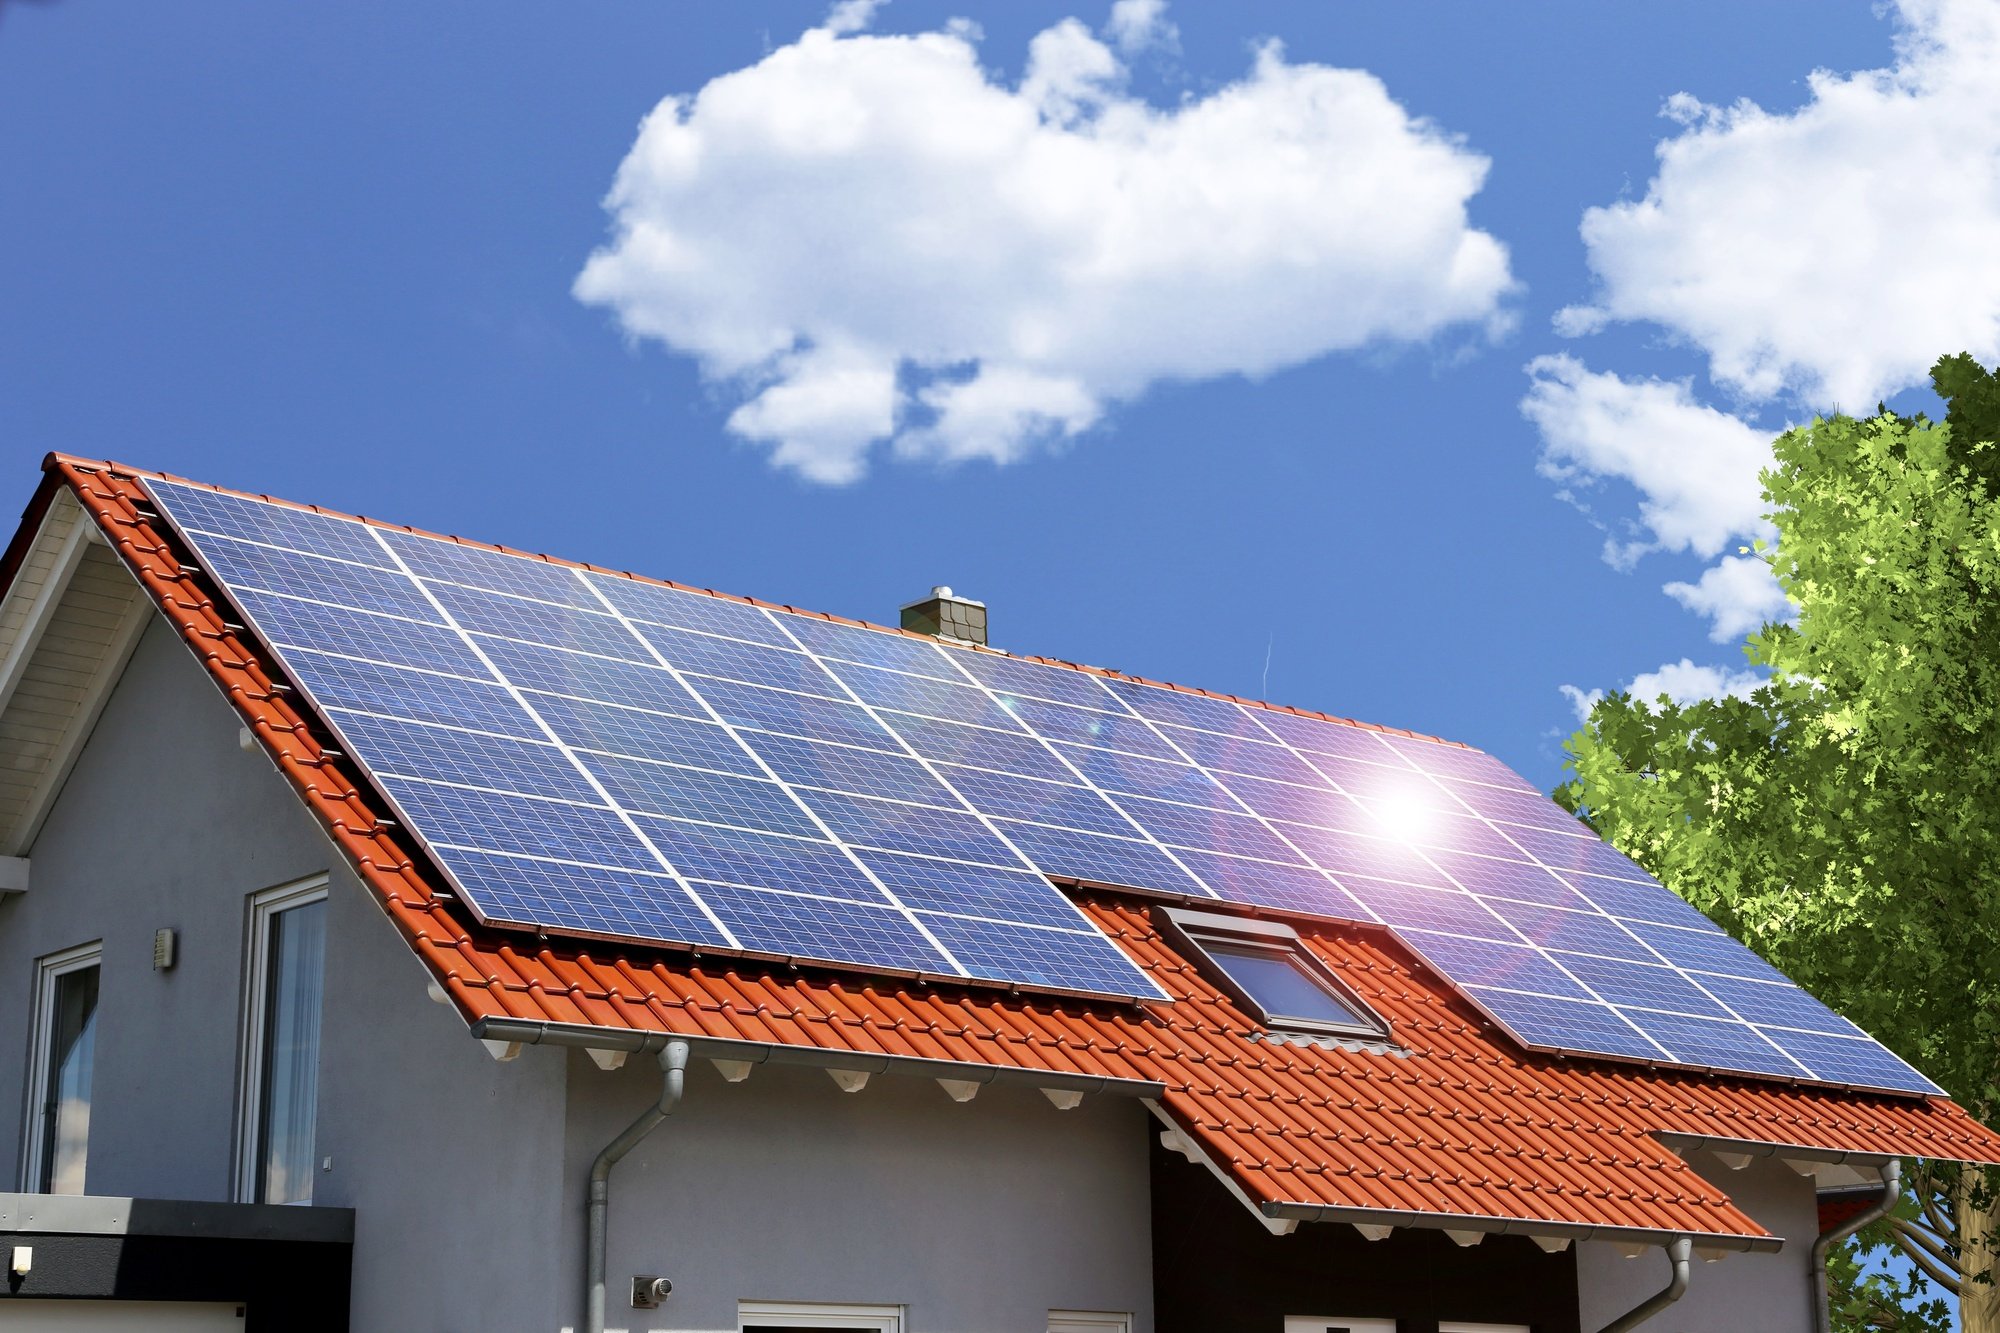 How Much Do Solar Panels Save on the Typical Energy Bill?